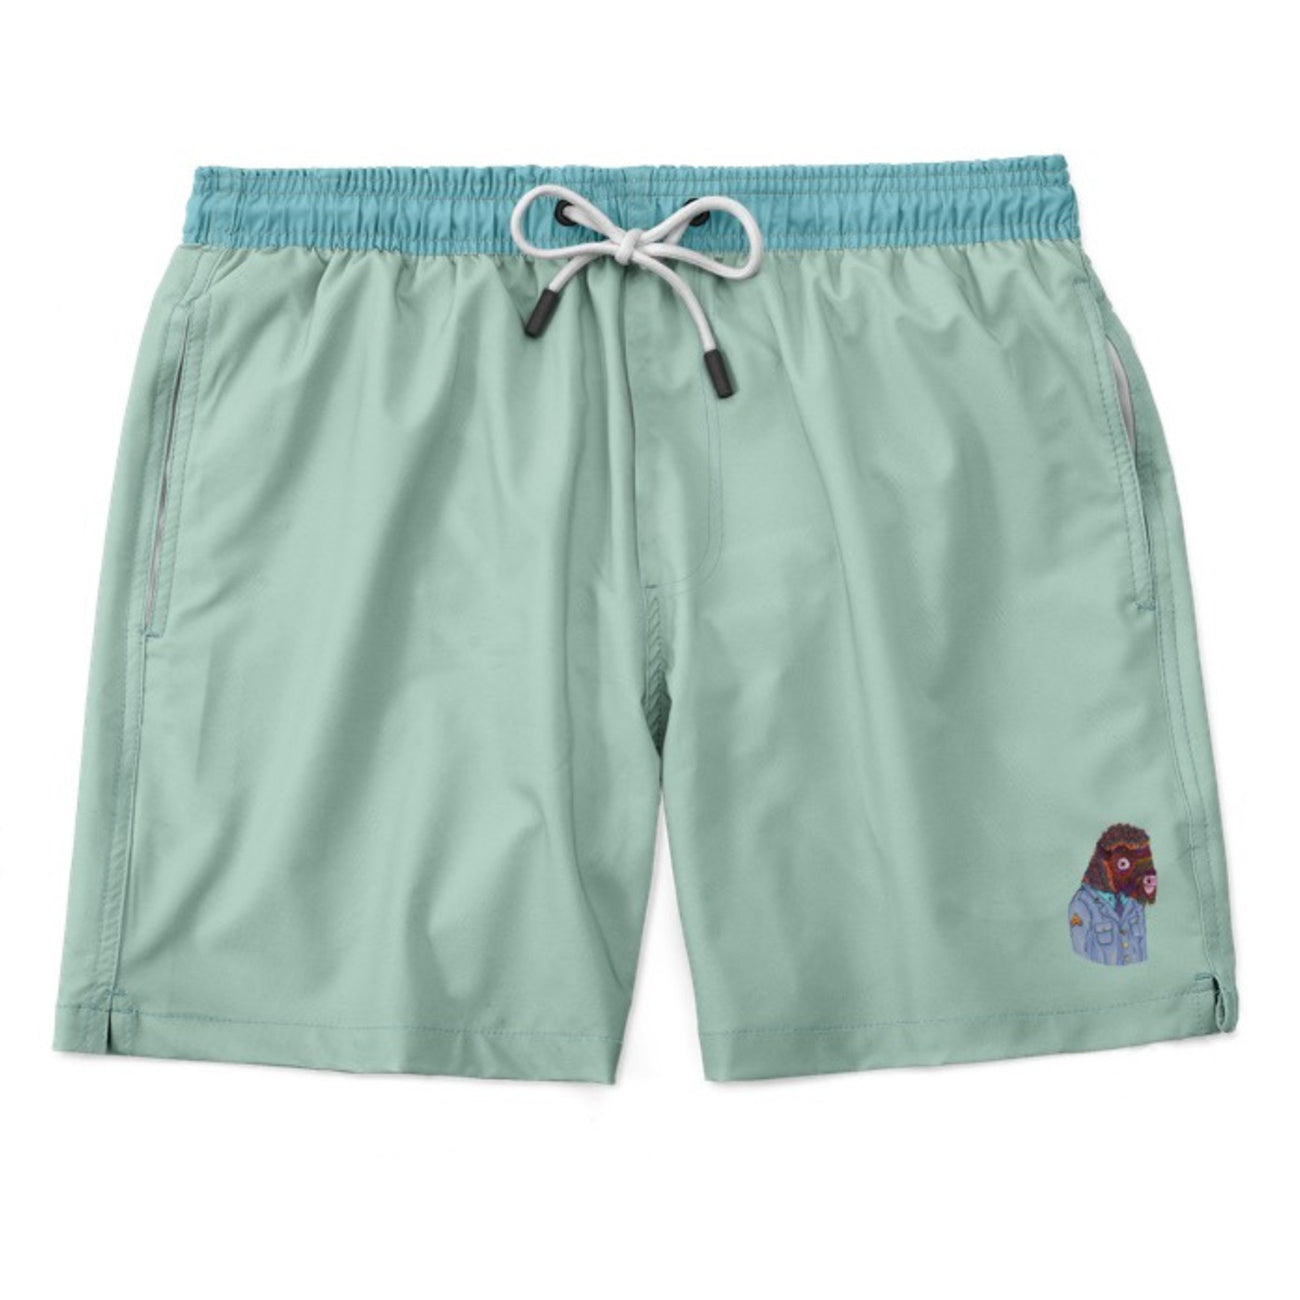 Solid green men's volley shorts featuring a logo-size print of buffalo in an officer's suit.